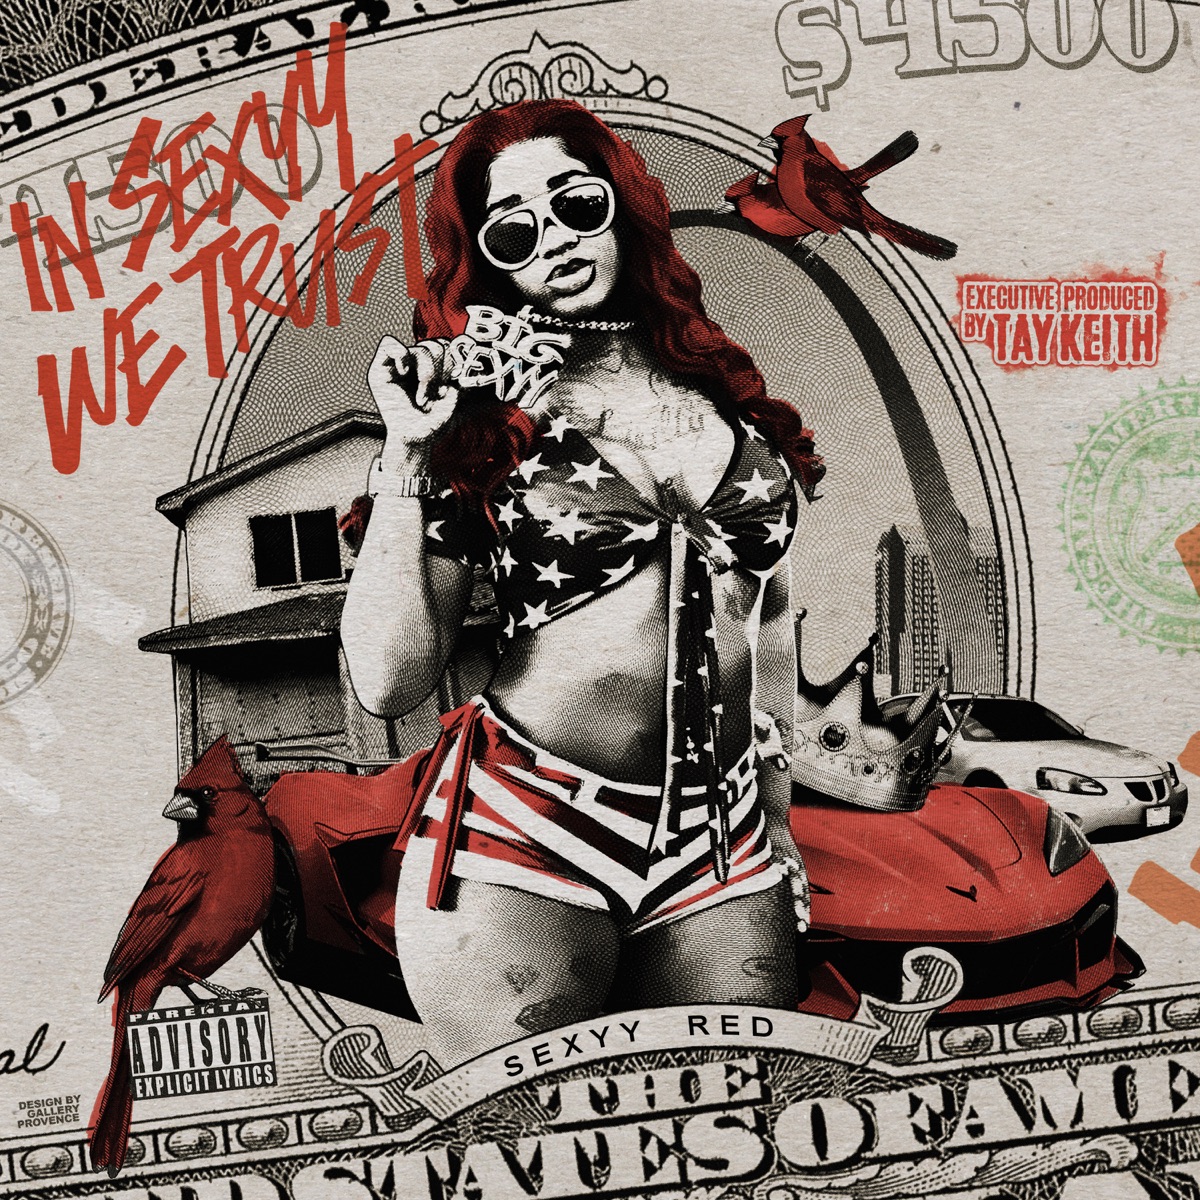 Sexyy Red - In Sexyy We Trust Album 1